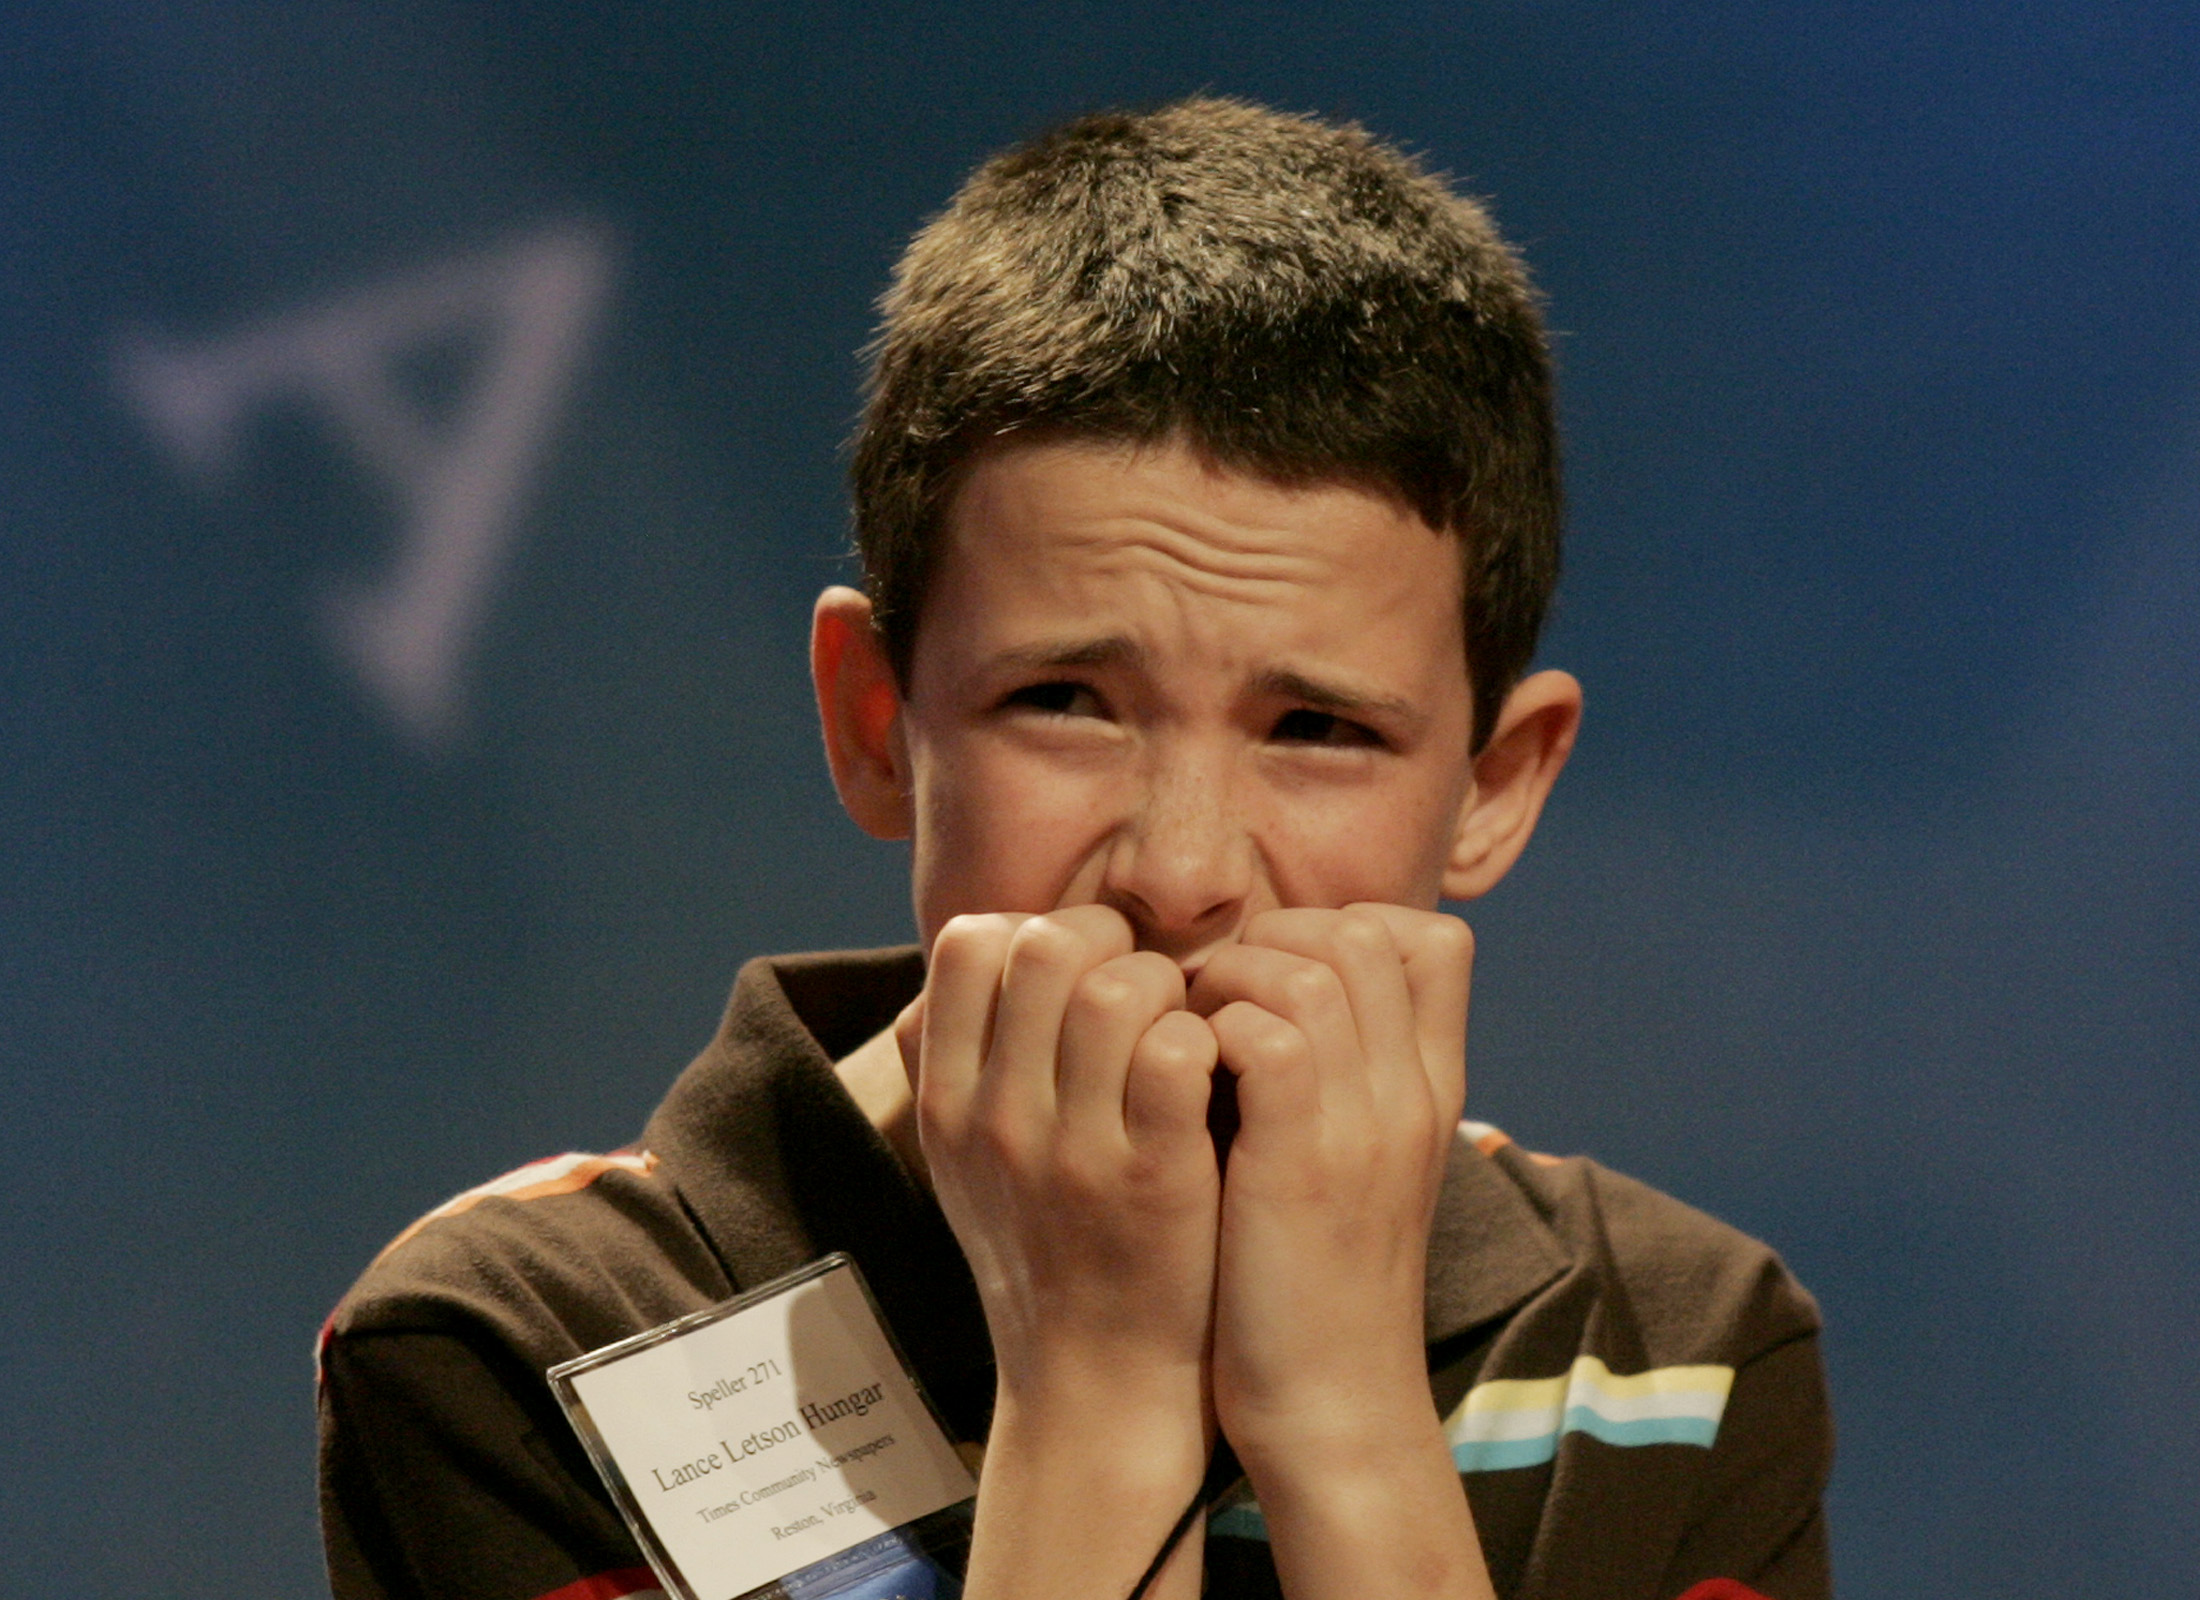 Lance Letson Hungar of McLean, Va. waits for his turn during the semi-final round of the 2008 Scripps National Spelling Bee on May 30, 2008 in Washington.